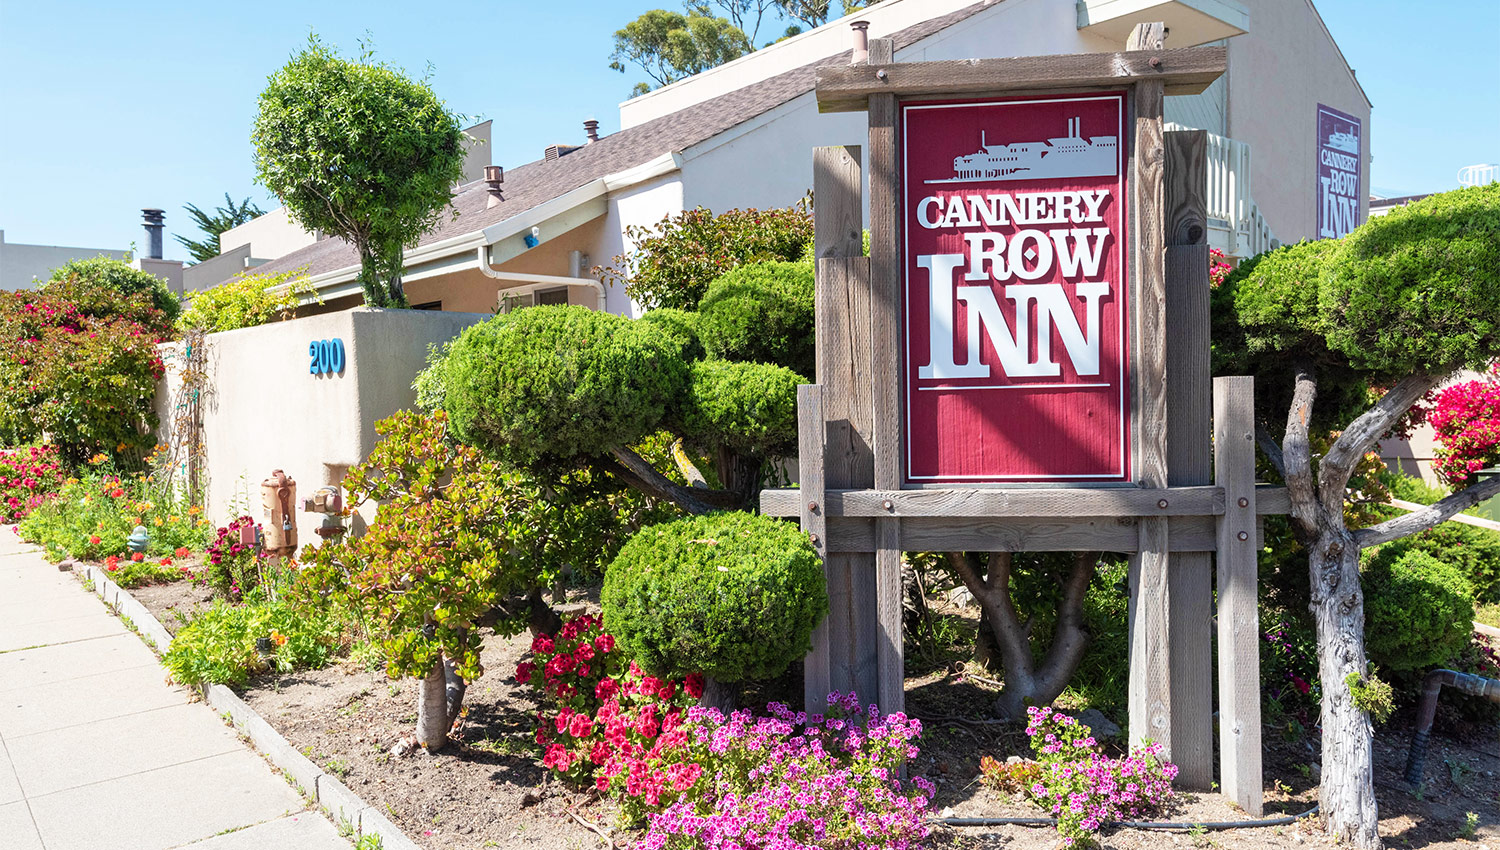 Welcome To The Cannery Row Inn, minutes from the row in Monterey, CA